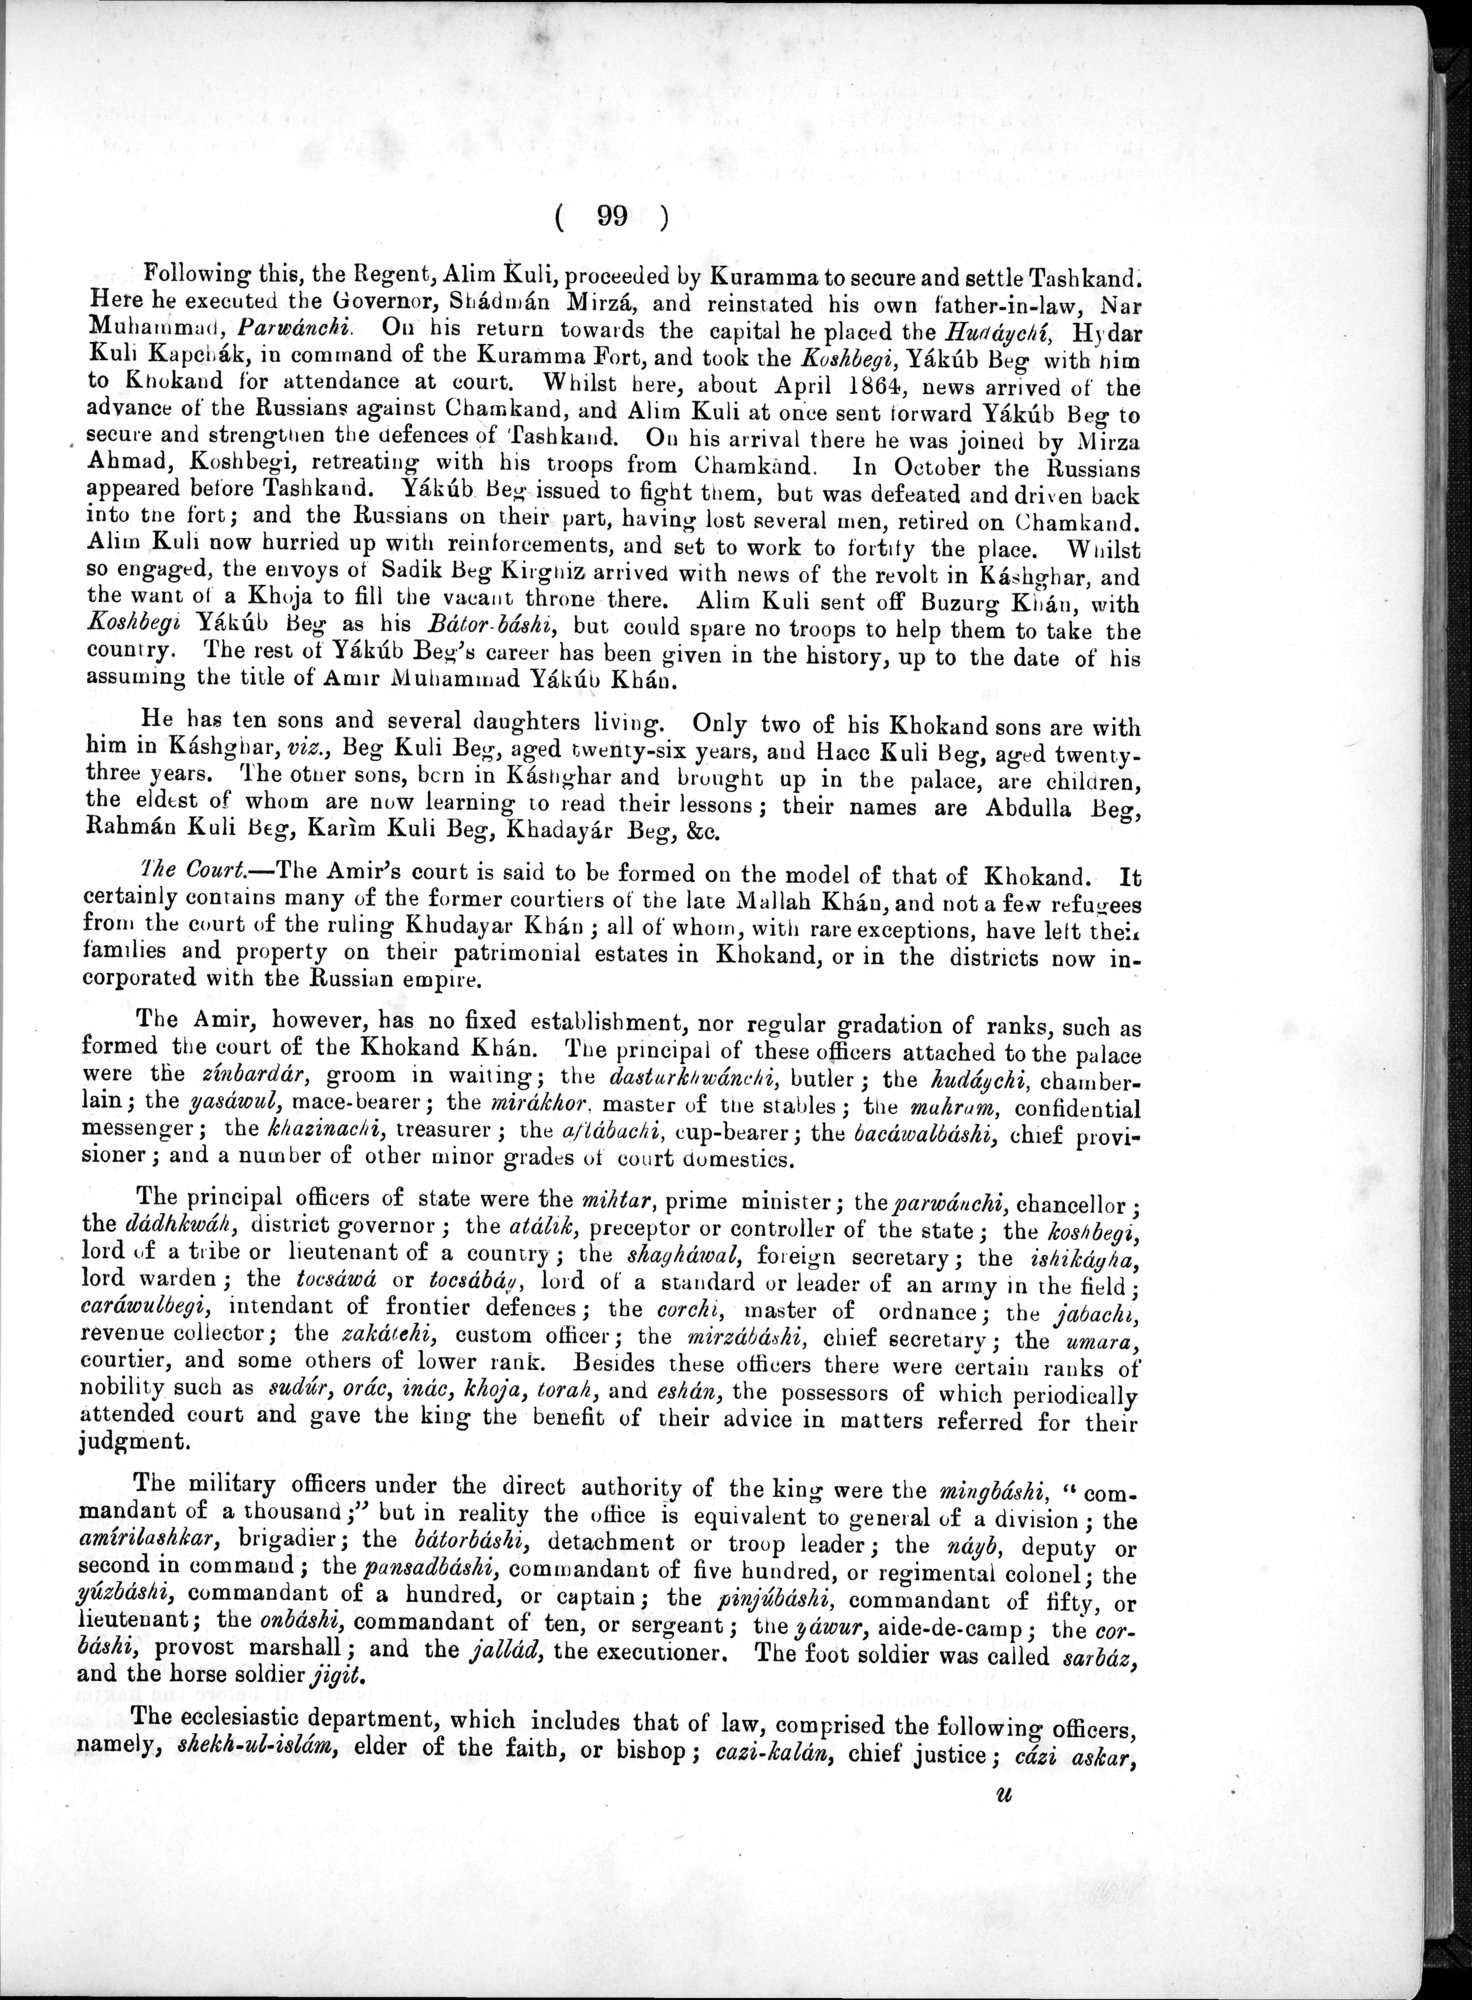 Report of a Mission to Yarkund in 1873 : vol.1 / Page 155 (Grayscale High Resolution Image)